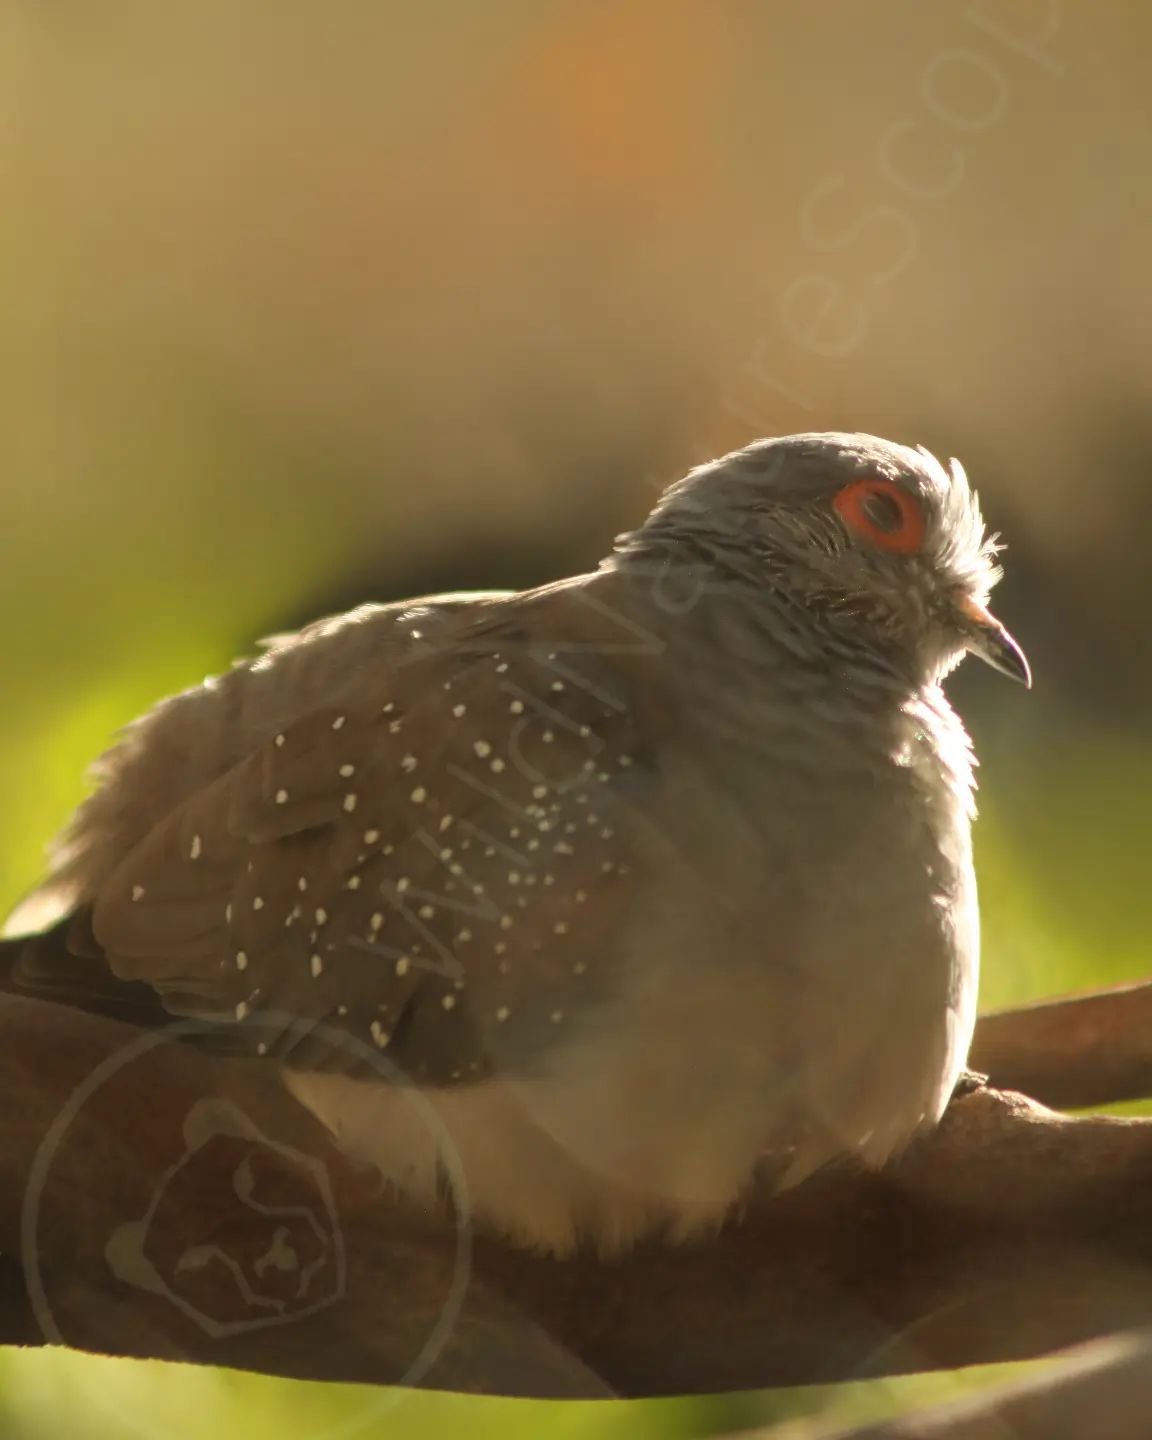 Diamond Doves are small Australian birds, at around 20 cm (7.8 in), they live in grasslands and feed almost entirely on seeds grasses.